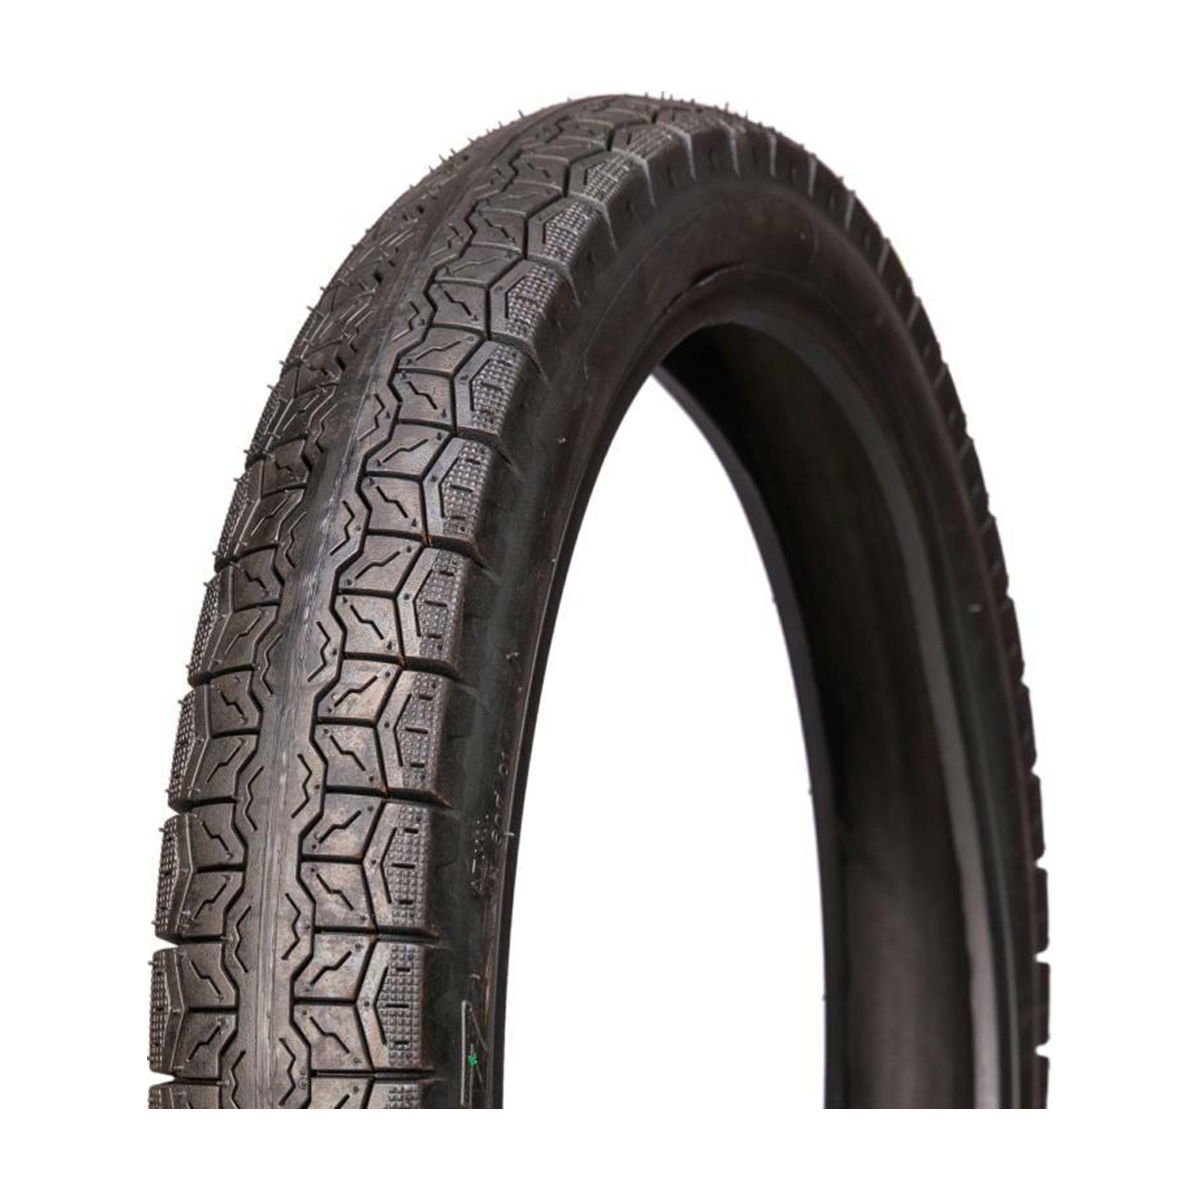 2.75-17 6PR  Front  & Rear Tire Motorcycle Tire with CCC Certification 2